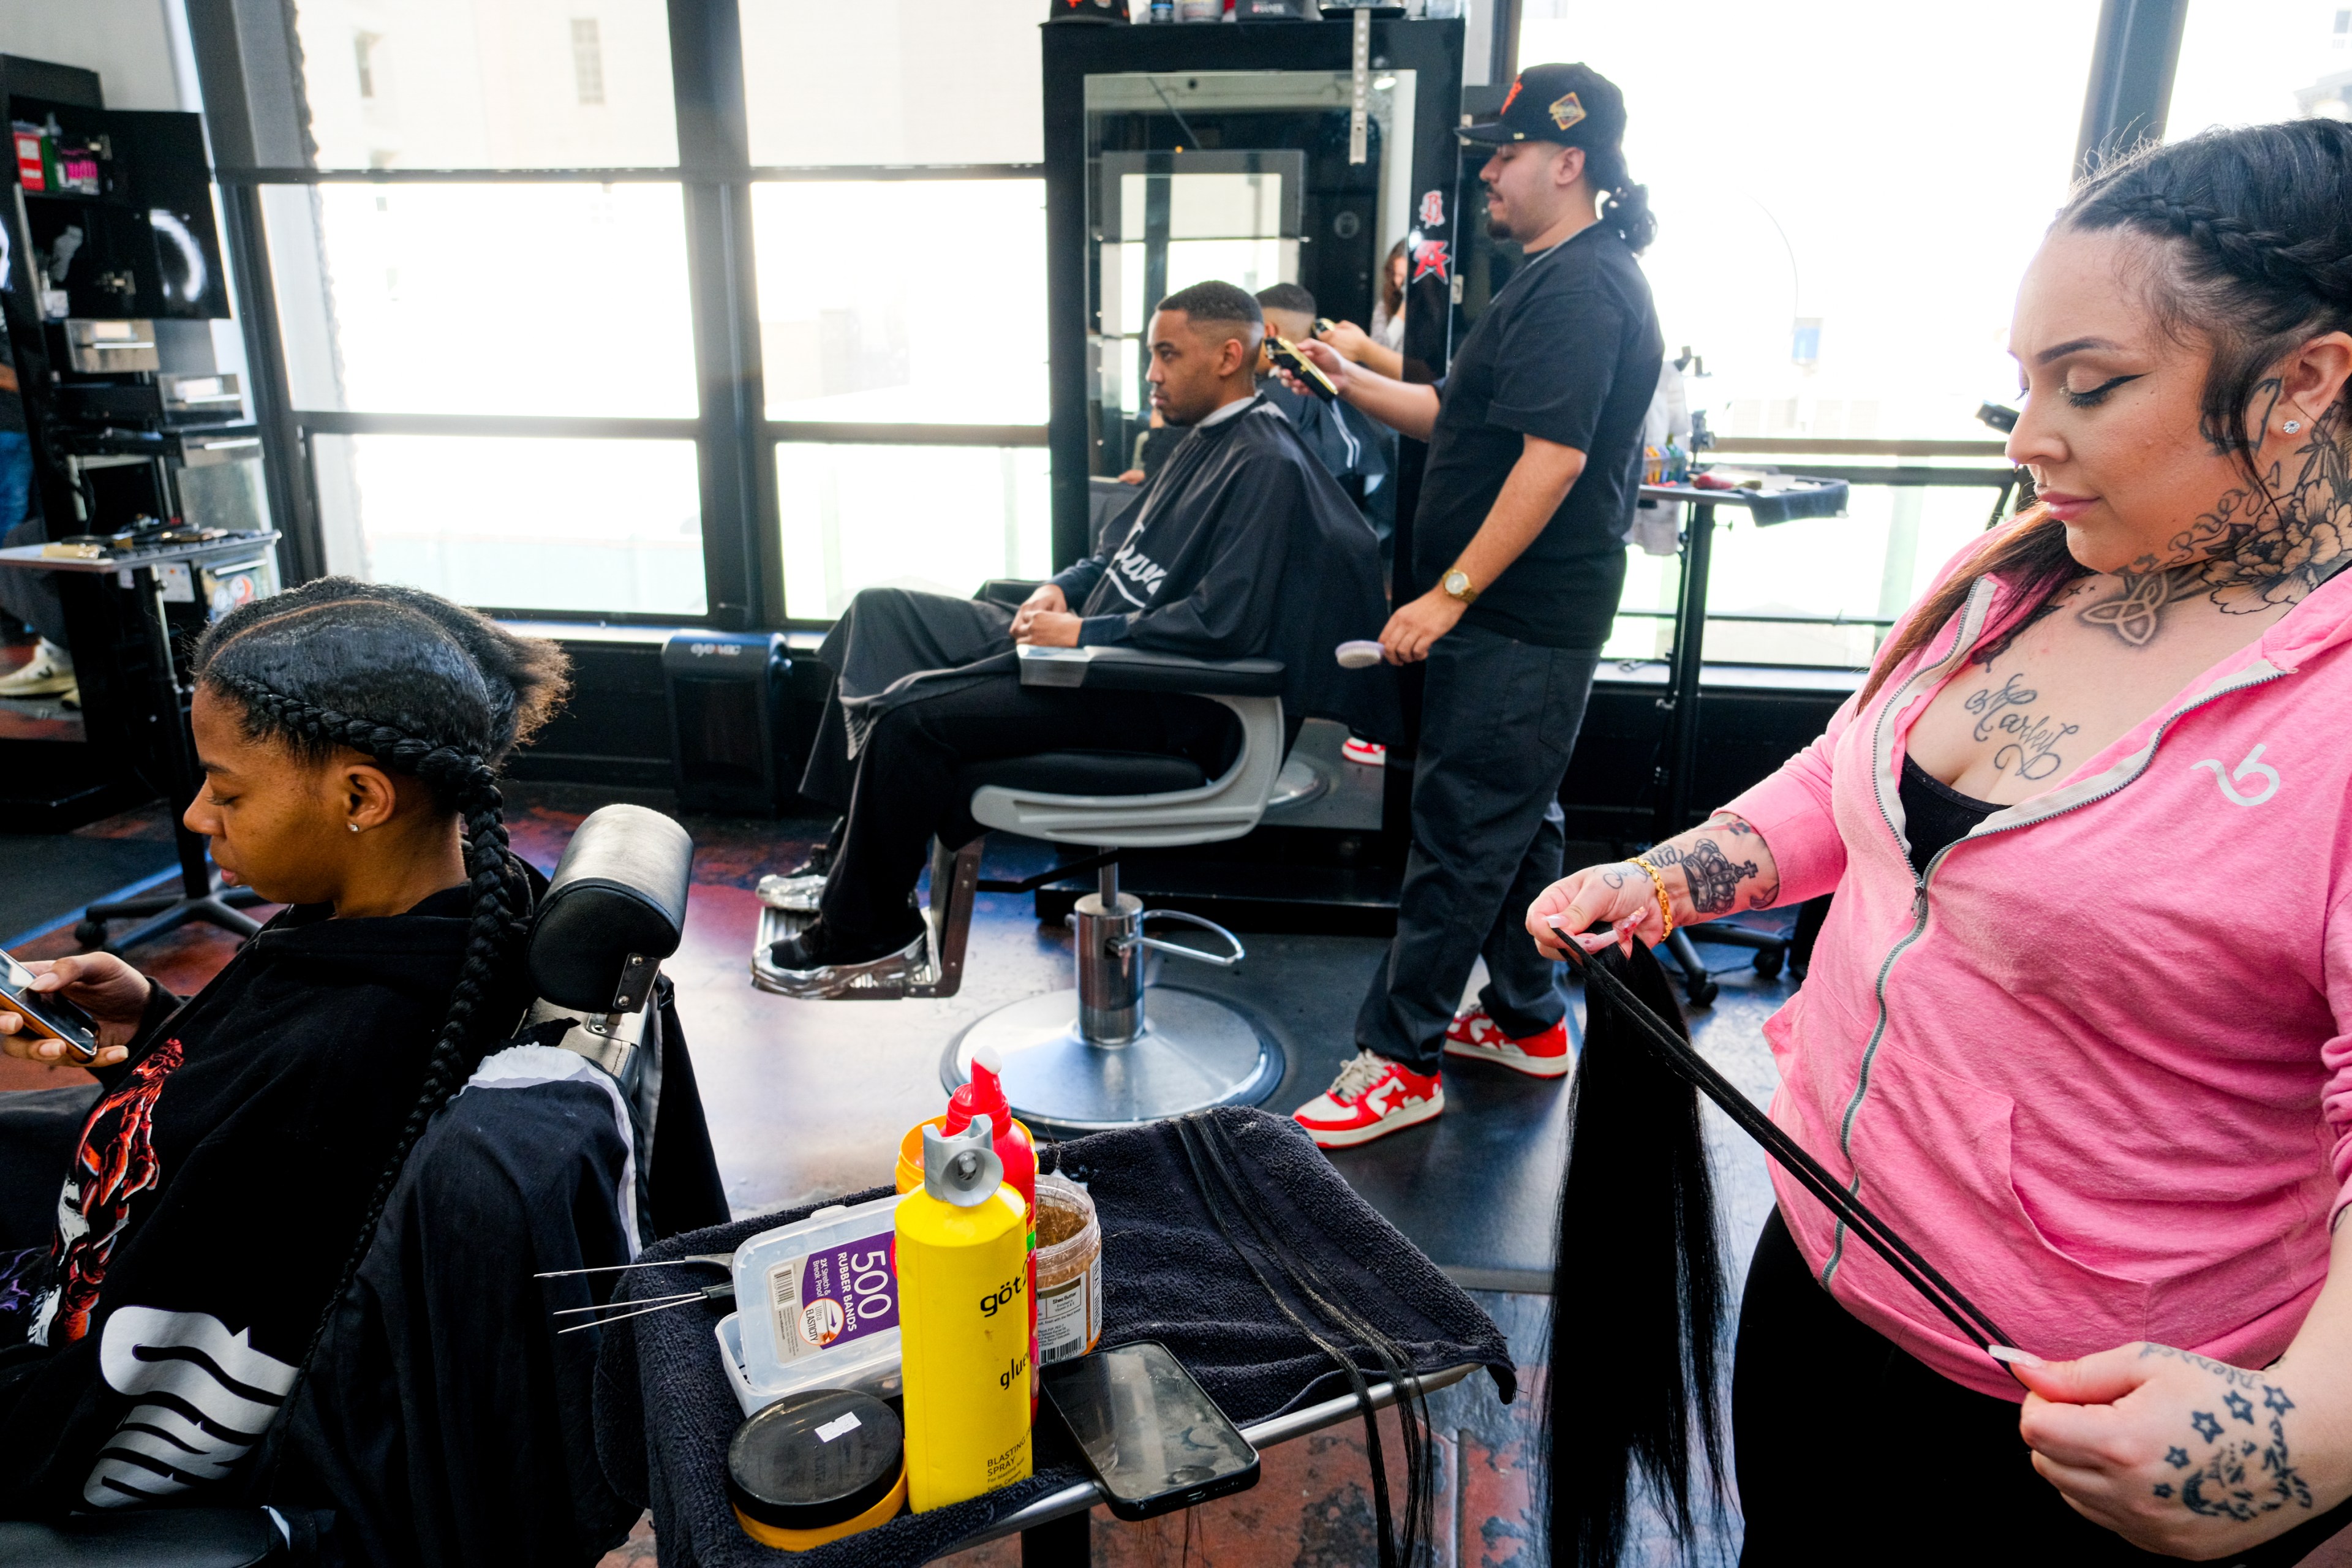 Inside a brightly lit barbershop, two barbers style clients' hair, with hair care products in the foreground.